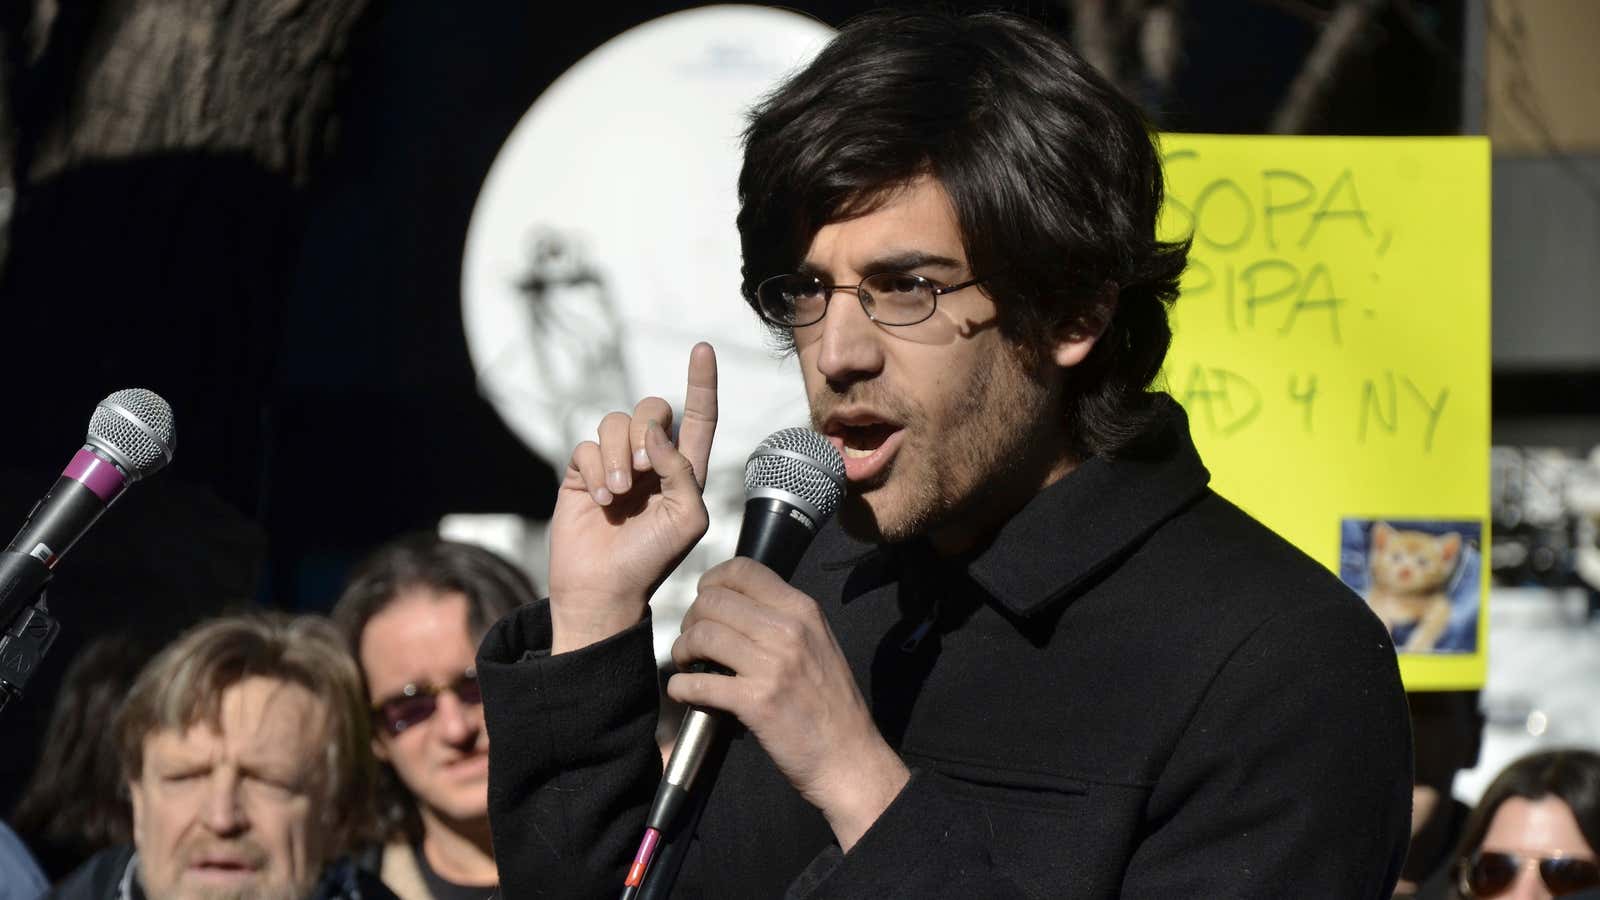 Aaron Swartz speaking at a rally against the Stop Online Piracy Act (SOPA) in January 2012.